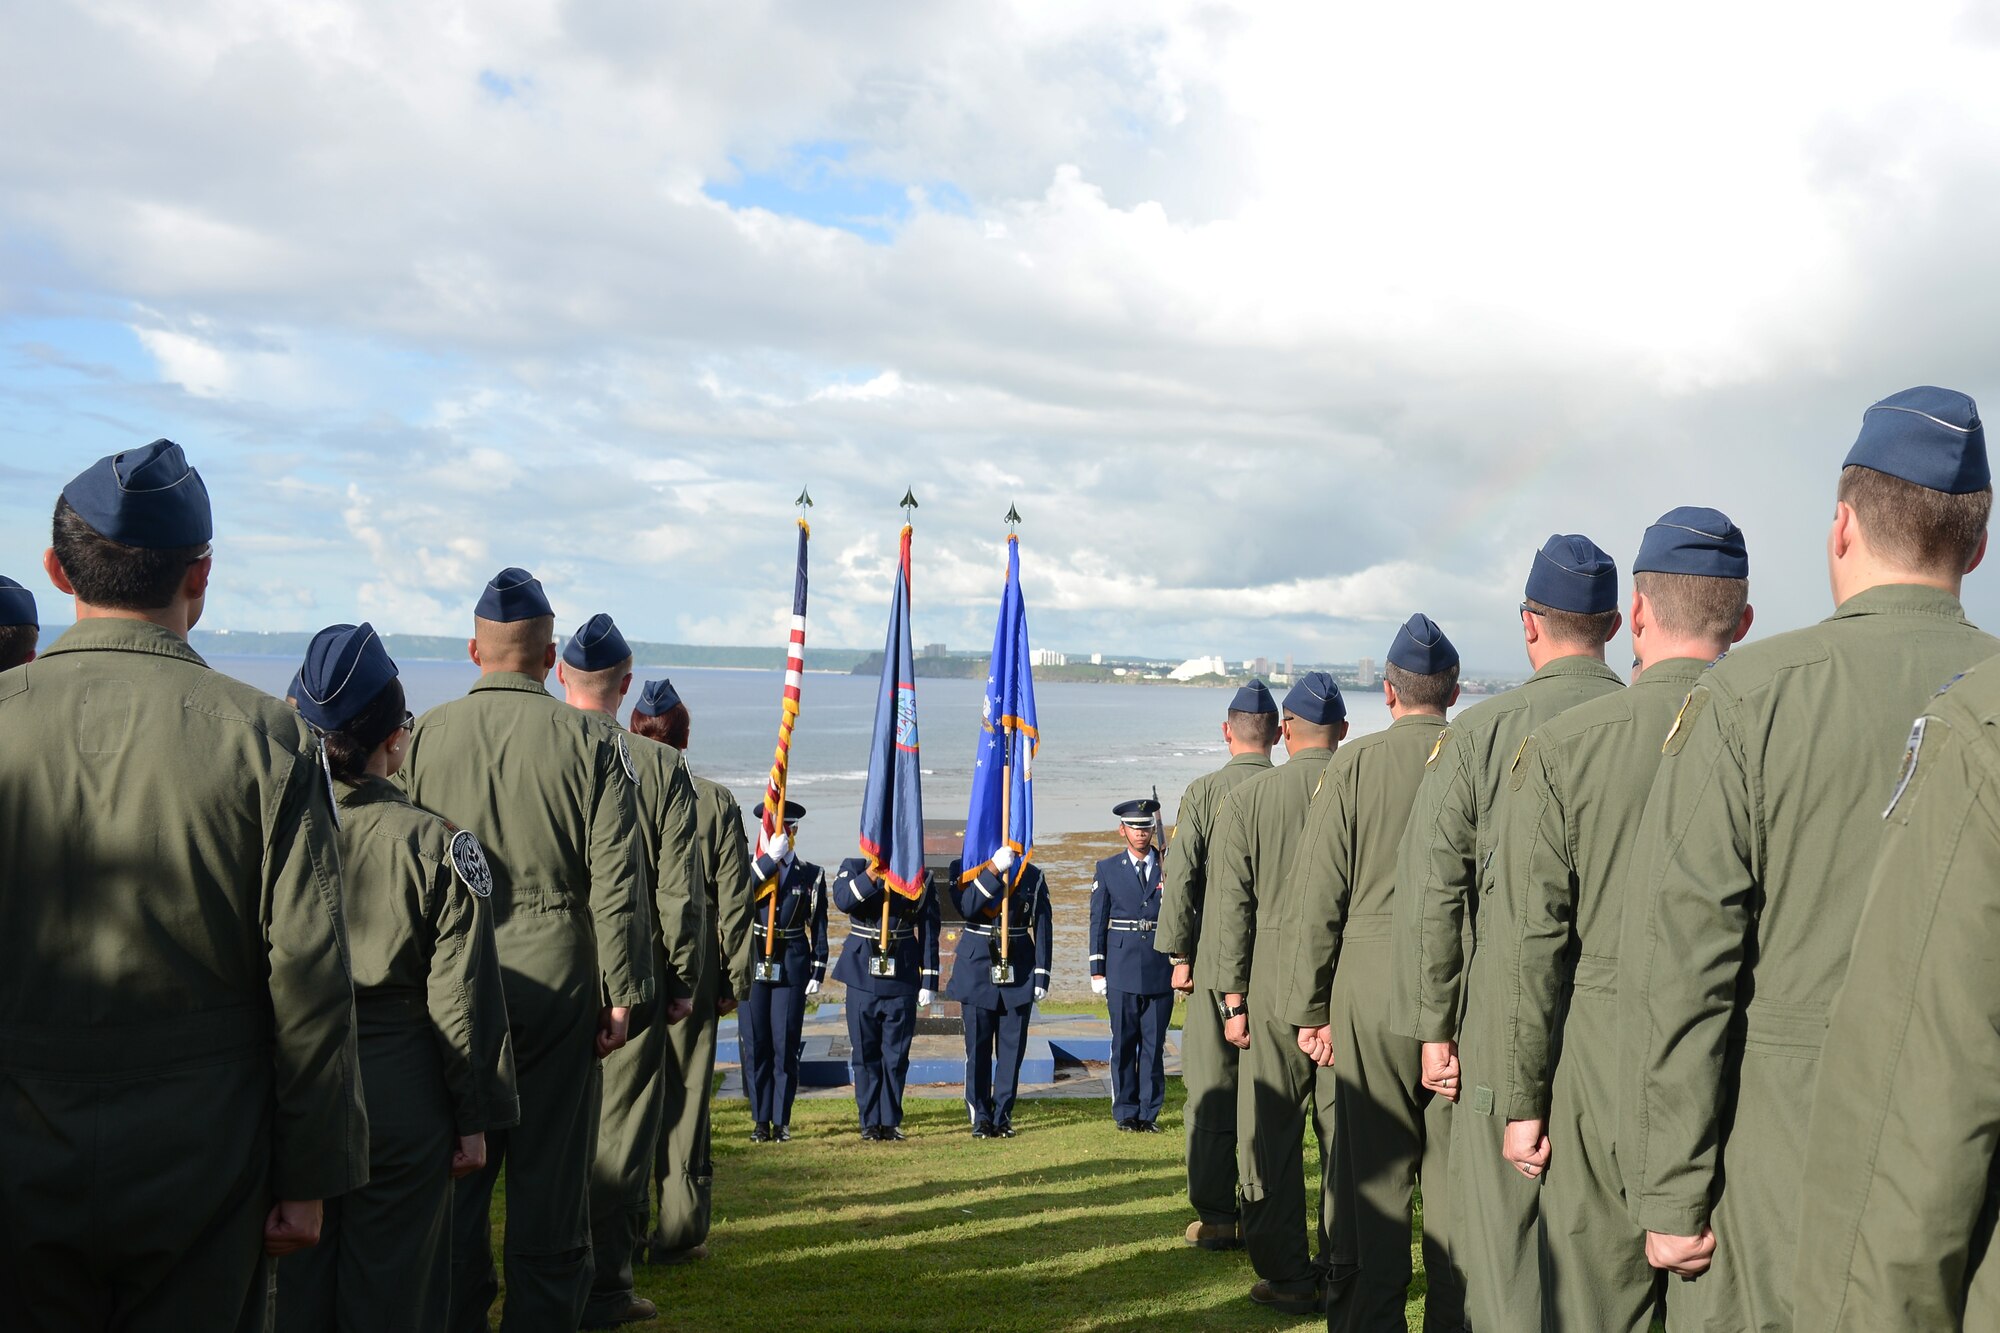 Airmen from the 20th Expeditionary Bomb Squadron currently deployed to Andersen from Barksdale Air Force Base, Louisiana, stand at attention for the Guam Hymn during the Raider 21 memorial ceremony July 21, 2015, in Adelup, Guam. Members of Team Andersen and representatives from the Government of Guam gathered together to remember the six Airmen who lost their lives when a B-52 Stratofortress with call sign  Raider 21 crashed off the coast of Guam July 21, 2008. (U.S. Air Force photo by Airman 1st Class Arielle Vasquez/Released)